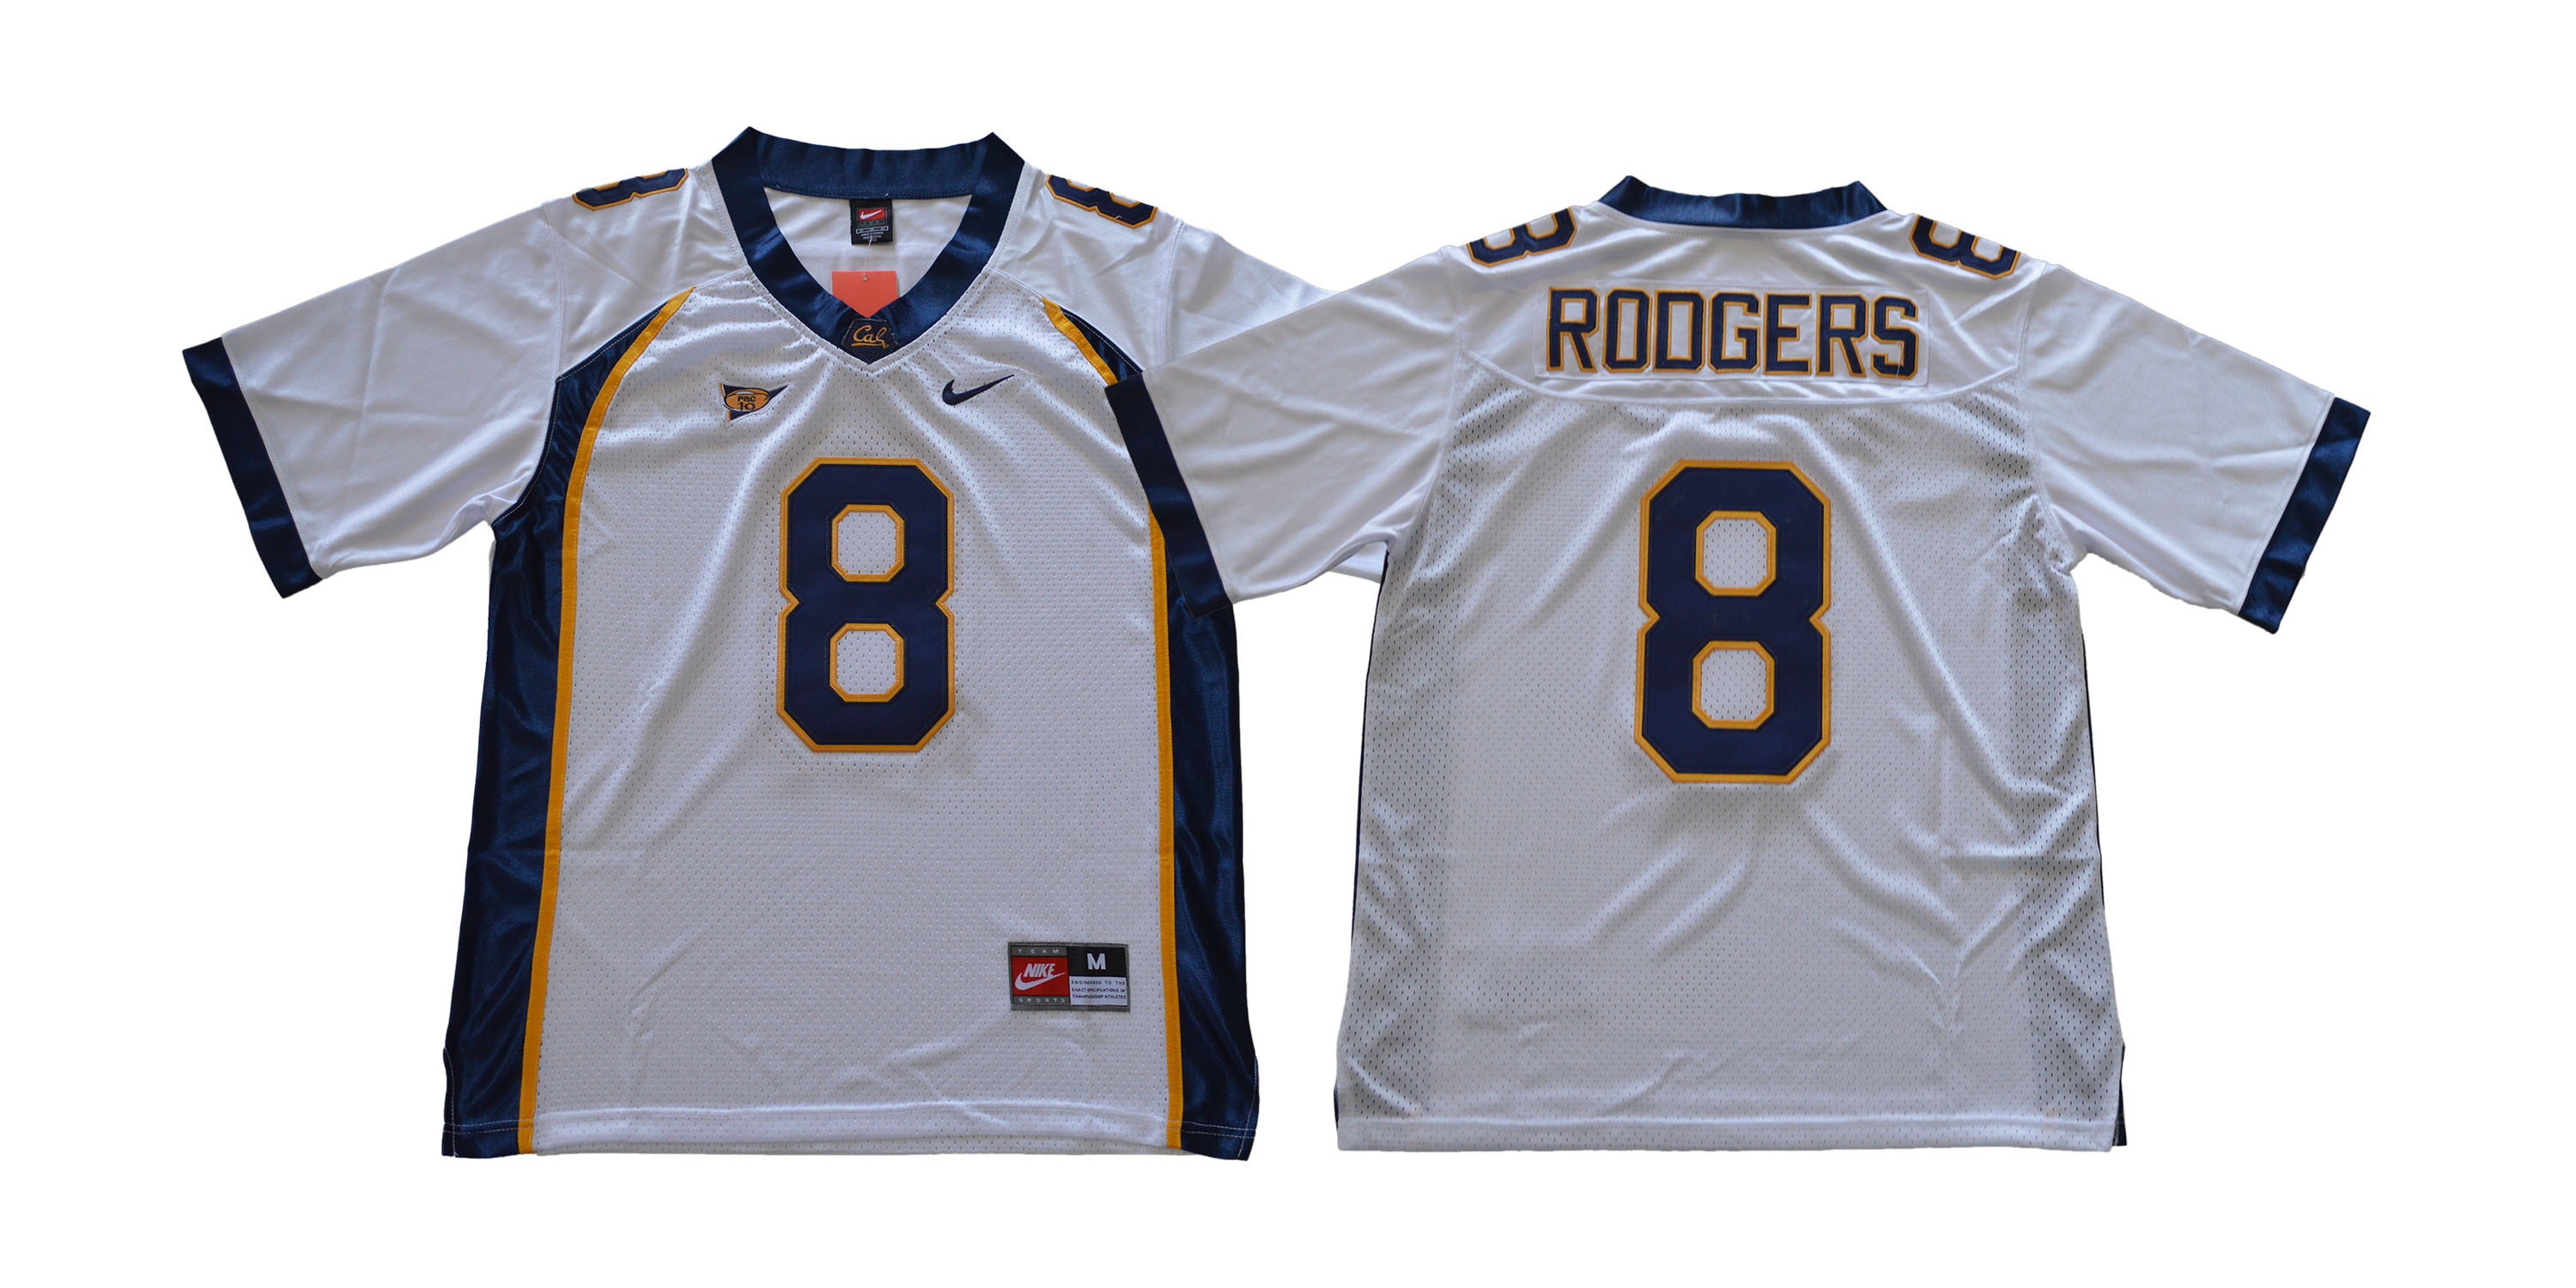 California Golden Bears 8 Aaron Rodgers White College Football Jersey.